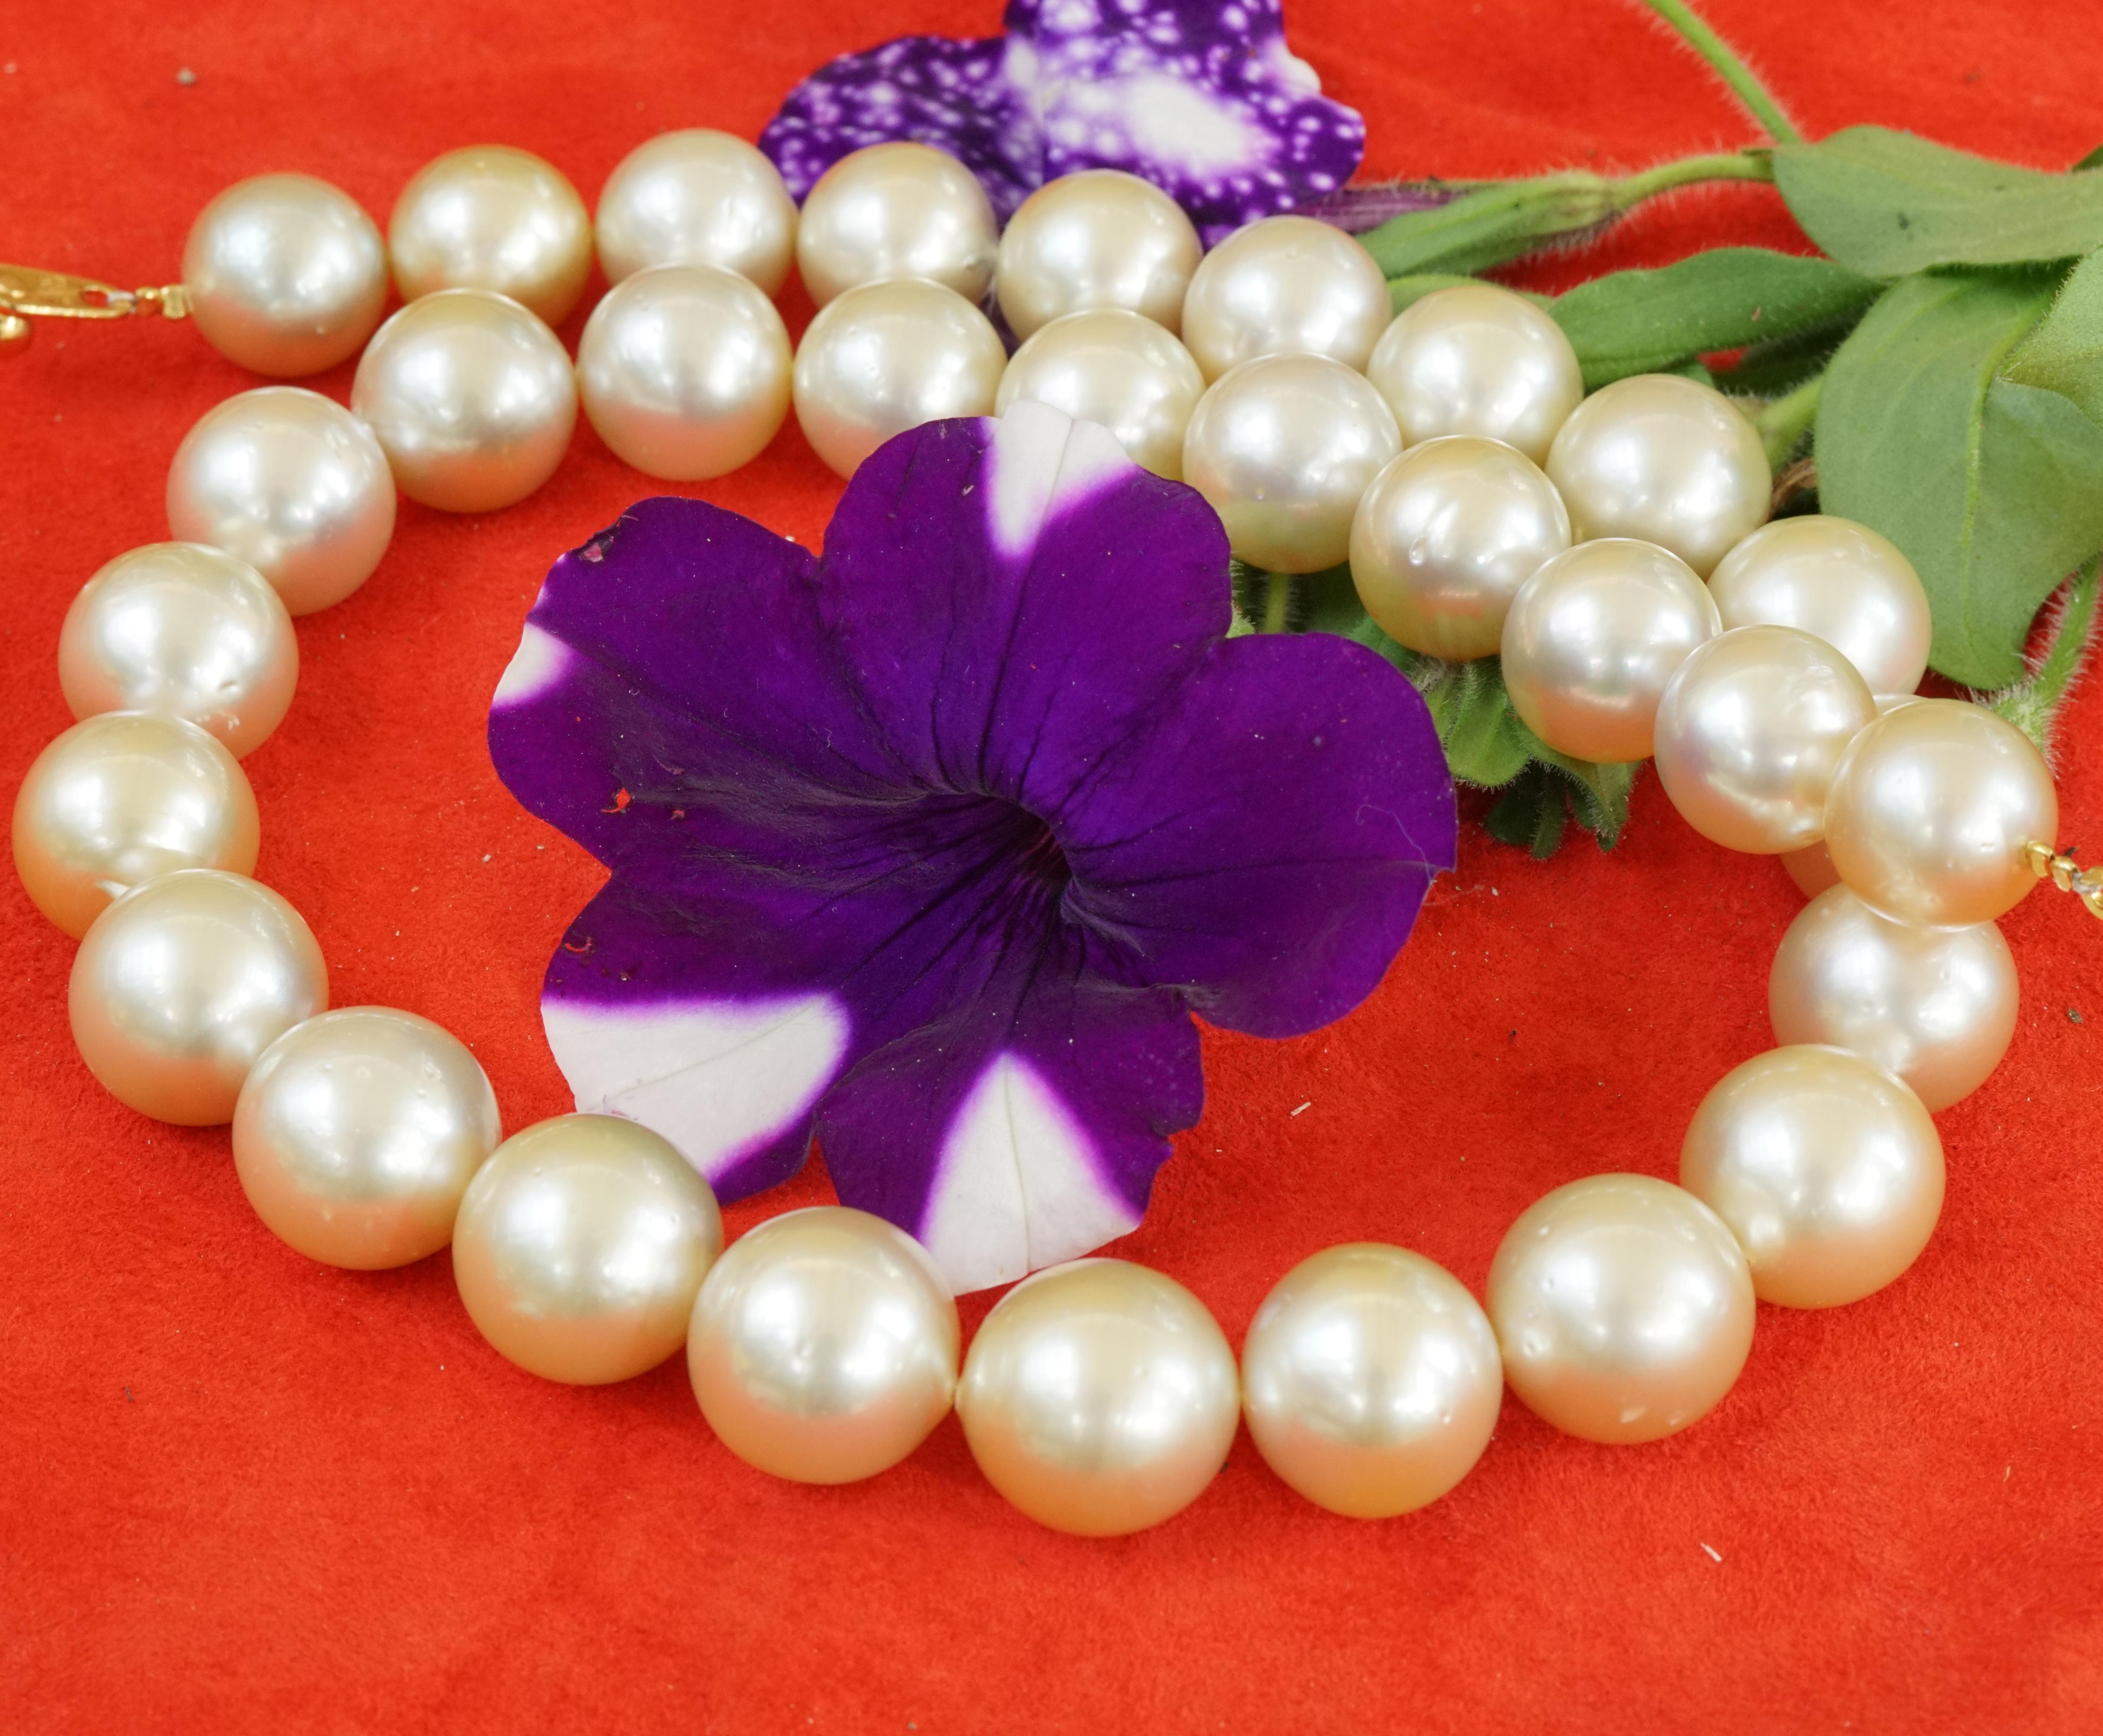 Modern AAA+ South Sea Pearl Necklace Light Champagne Finest Luster